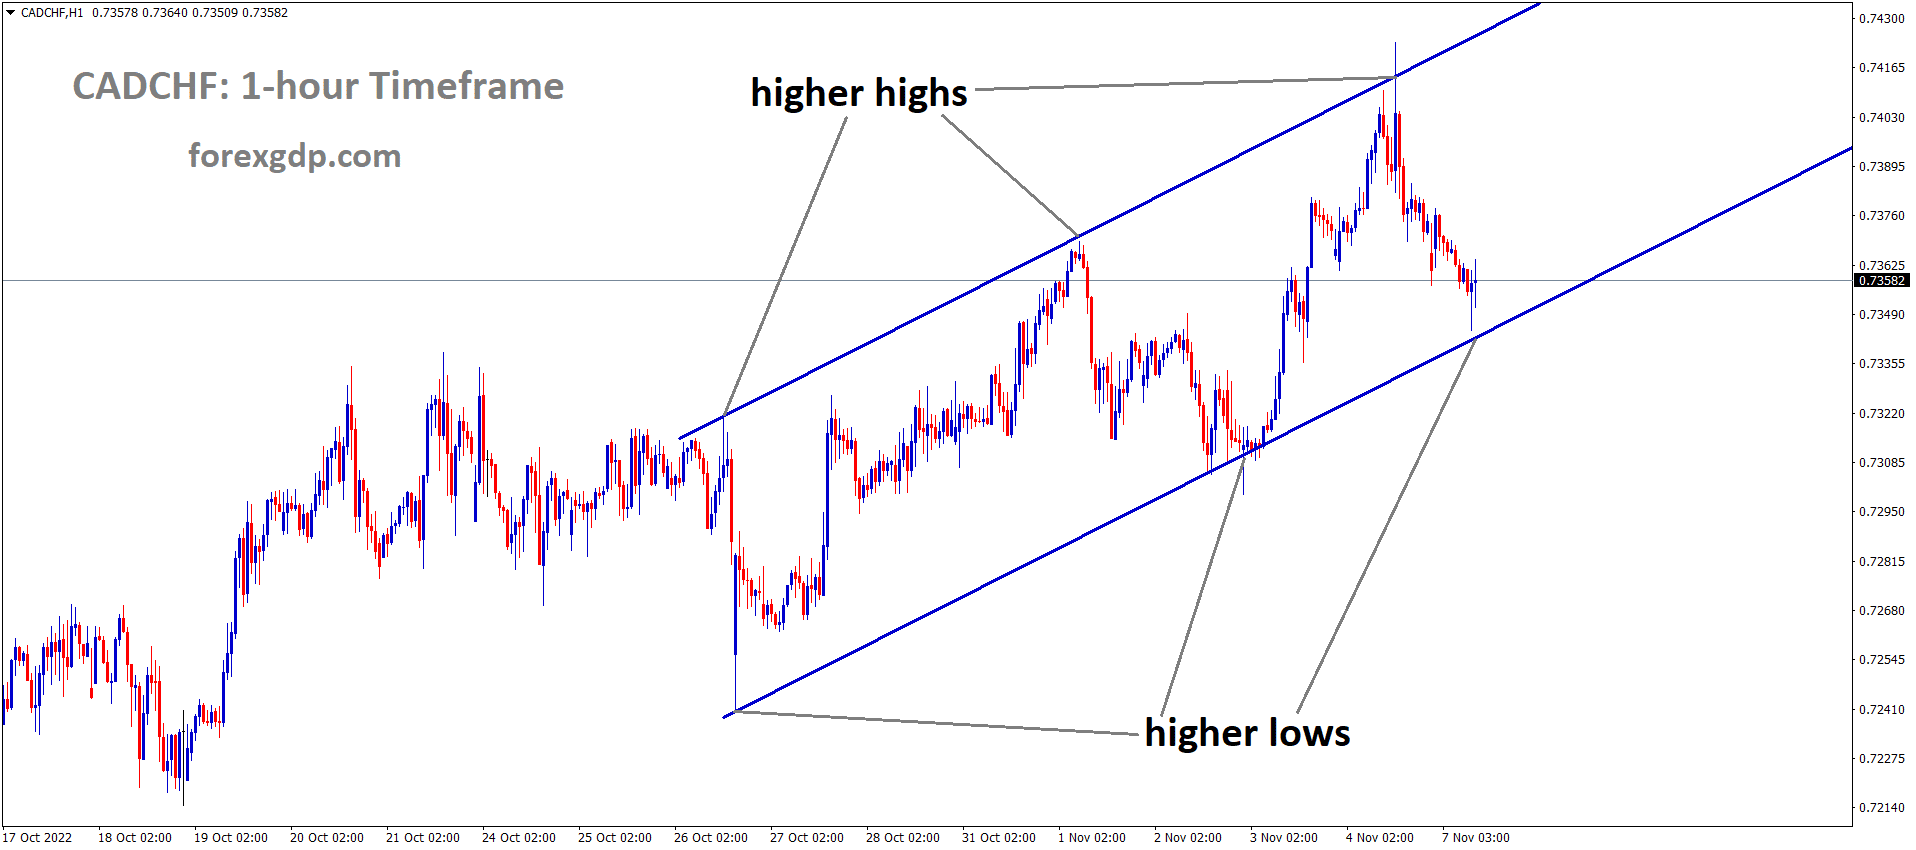 CADCHF is moving in an Ascending channel and the market has reached the higher low area of the channel